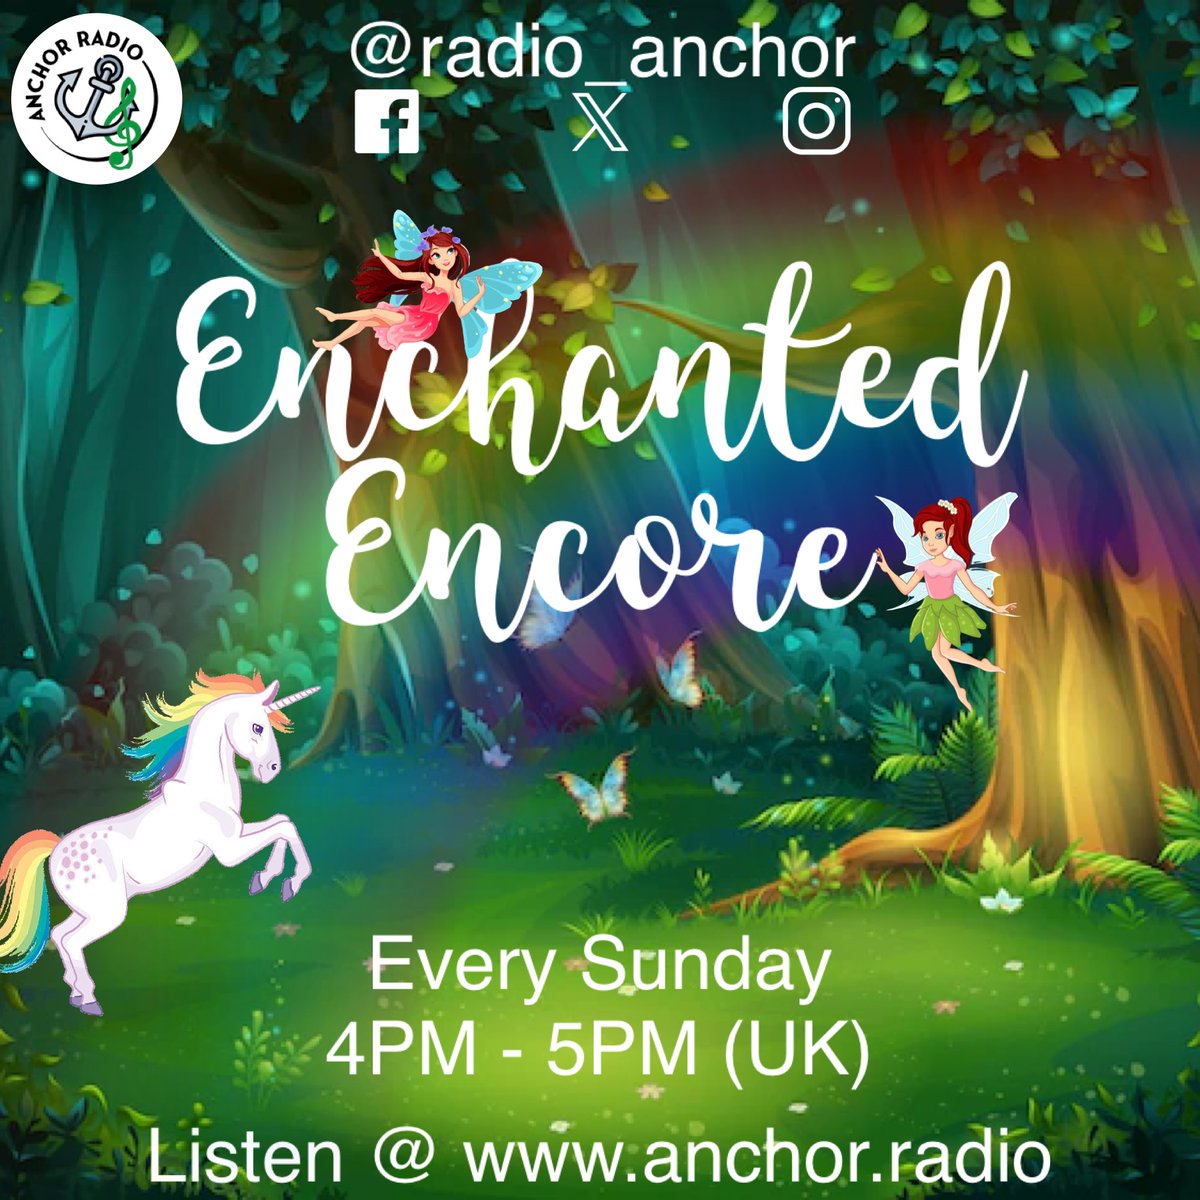 Up at 4 pm, it’s enchanted encore, come and join in for a singalong Sunday, always remember, your  never fully dressed without a smile